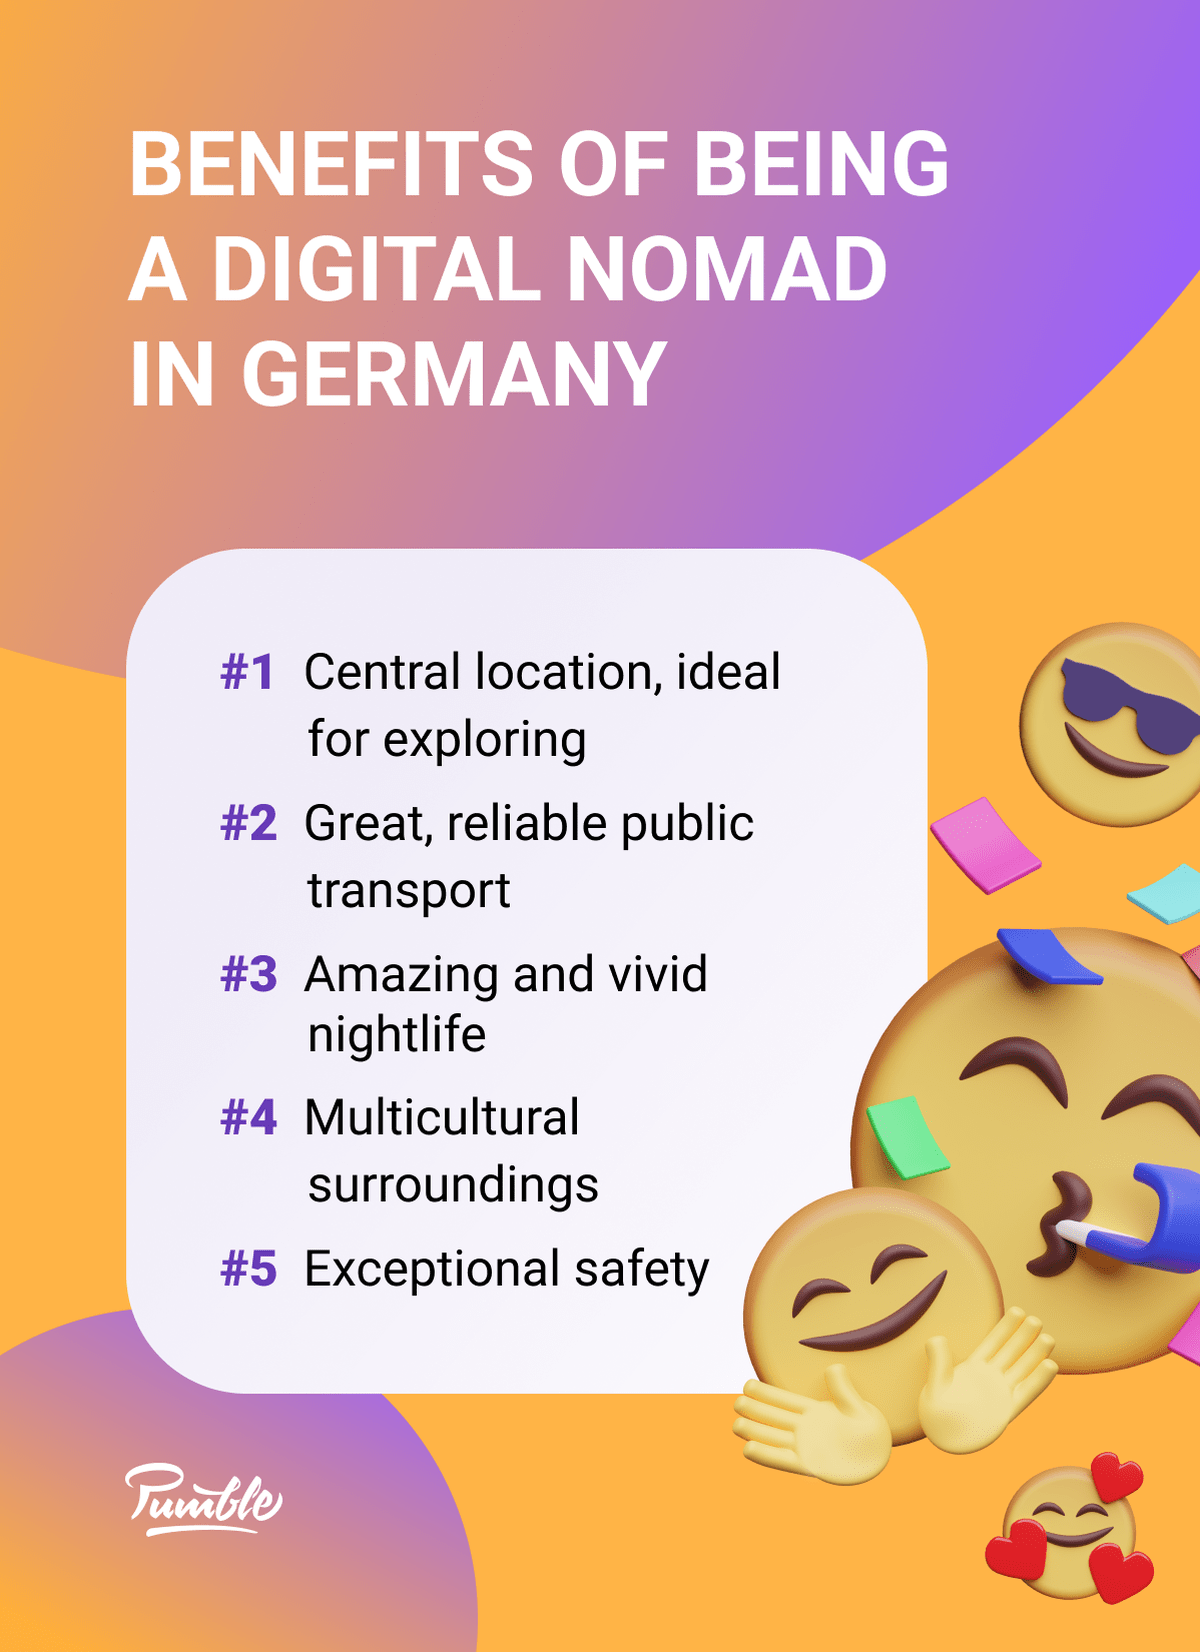 Benefits of being a digital nomad in Germany